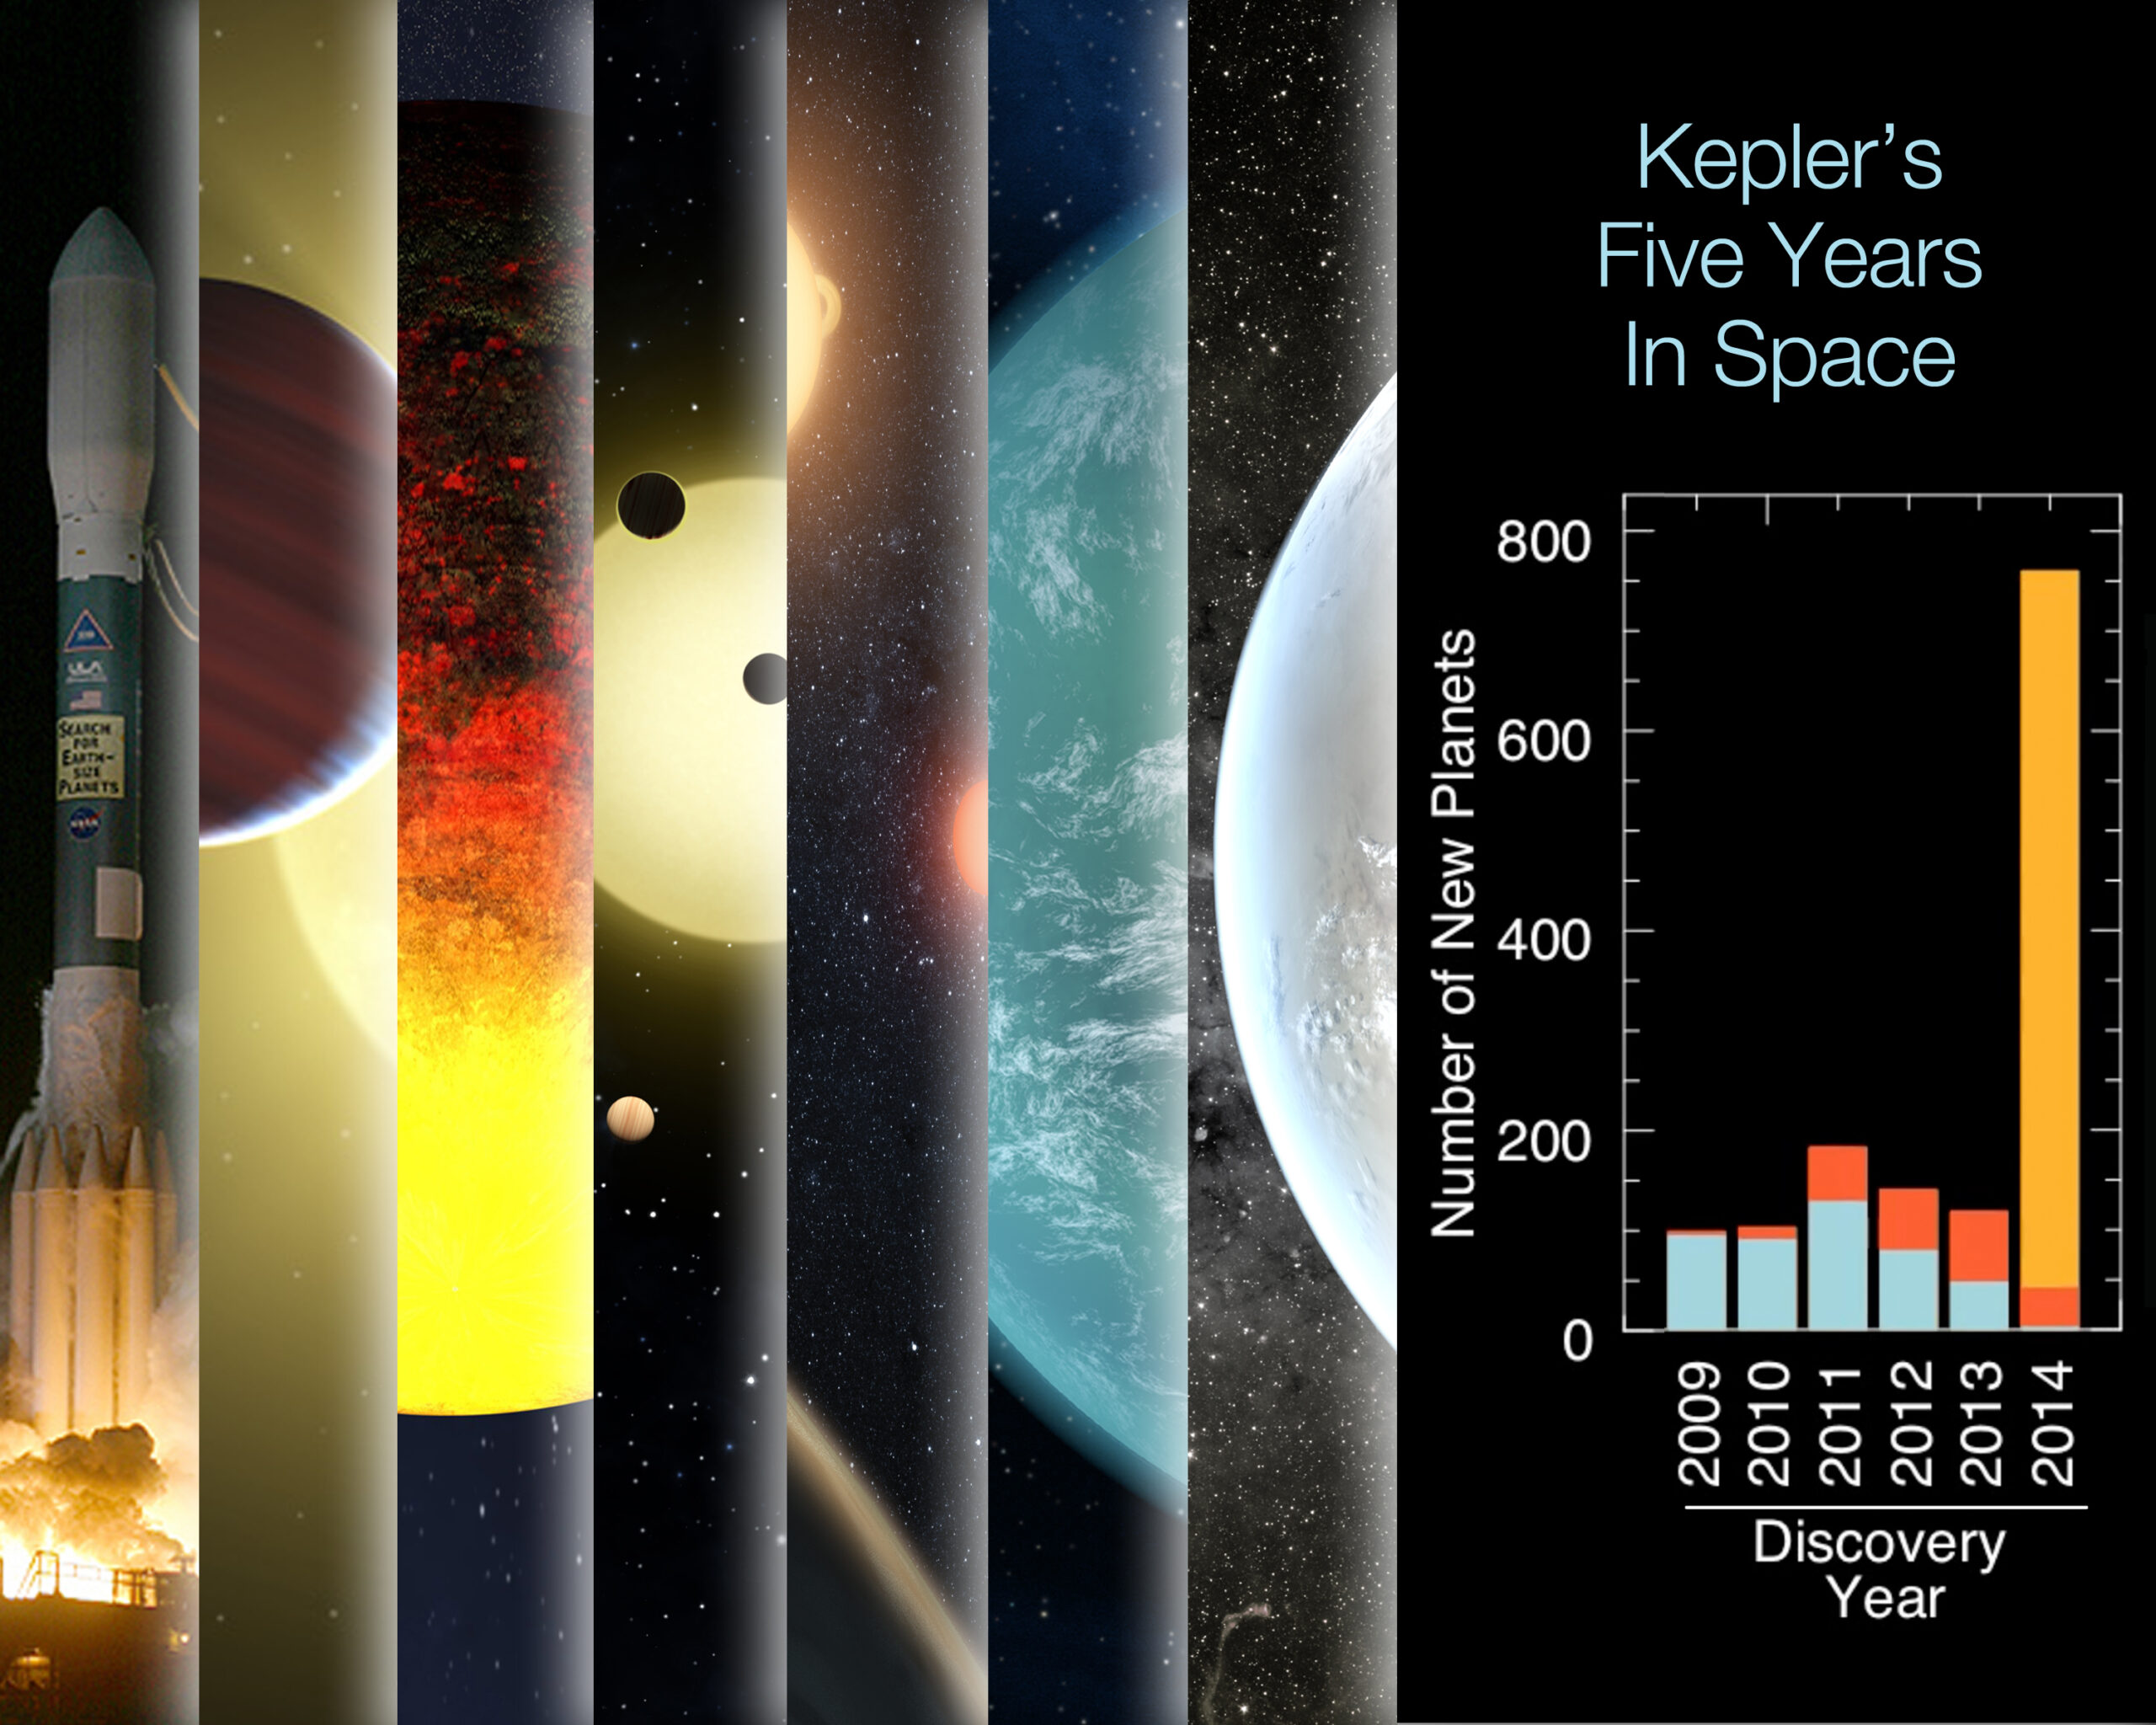 Kepler Celebrates its Fifth Anniversary in Space